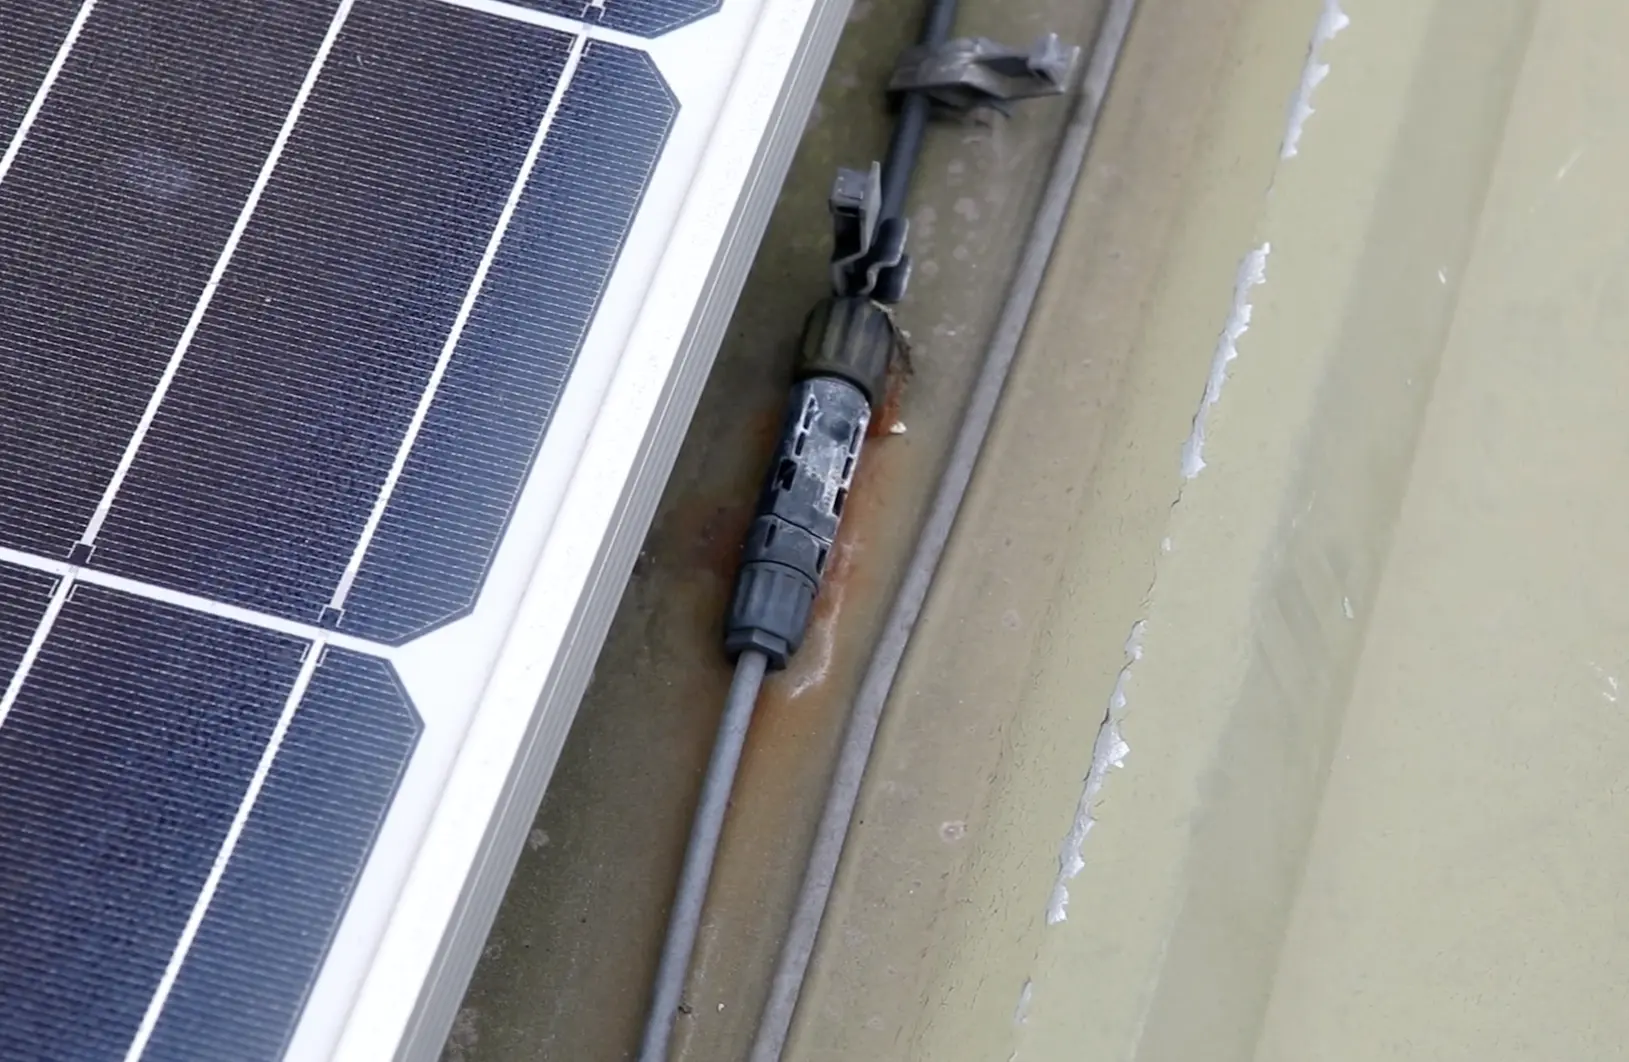 insulation fault on solar panels - What is the insulation fault